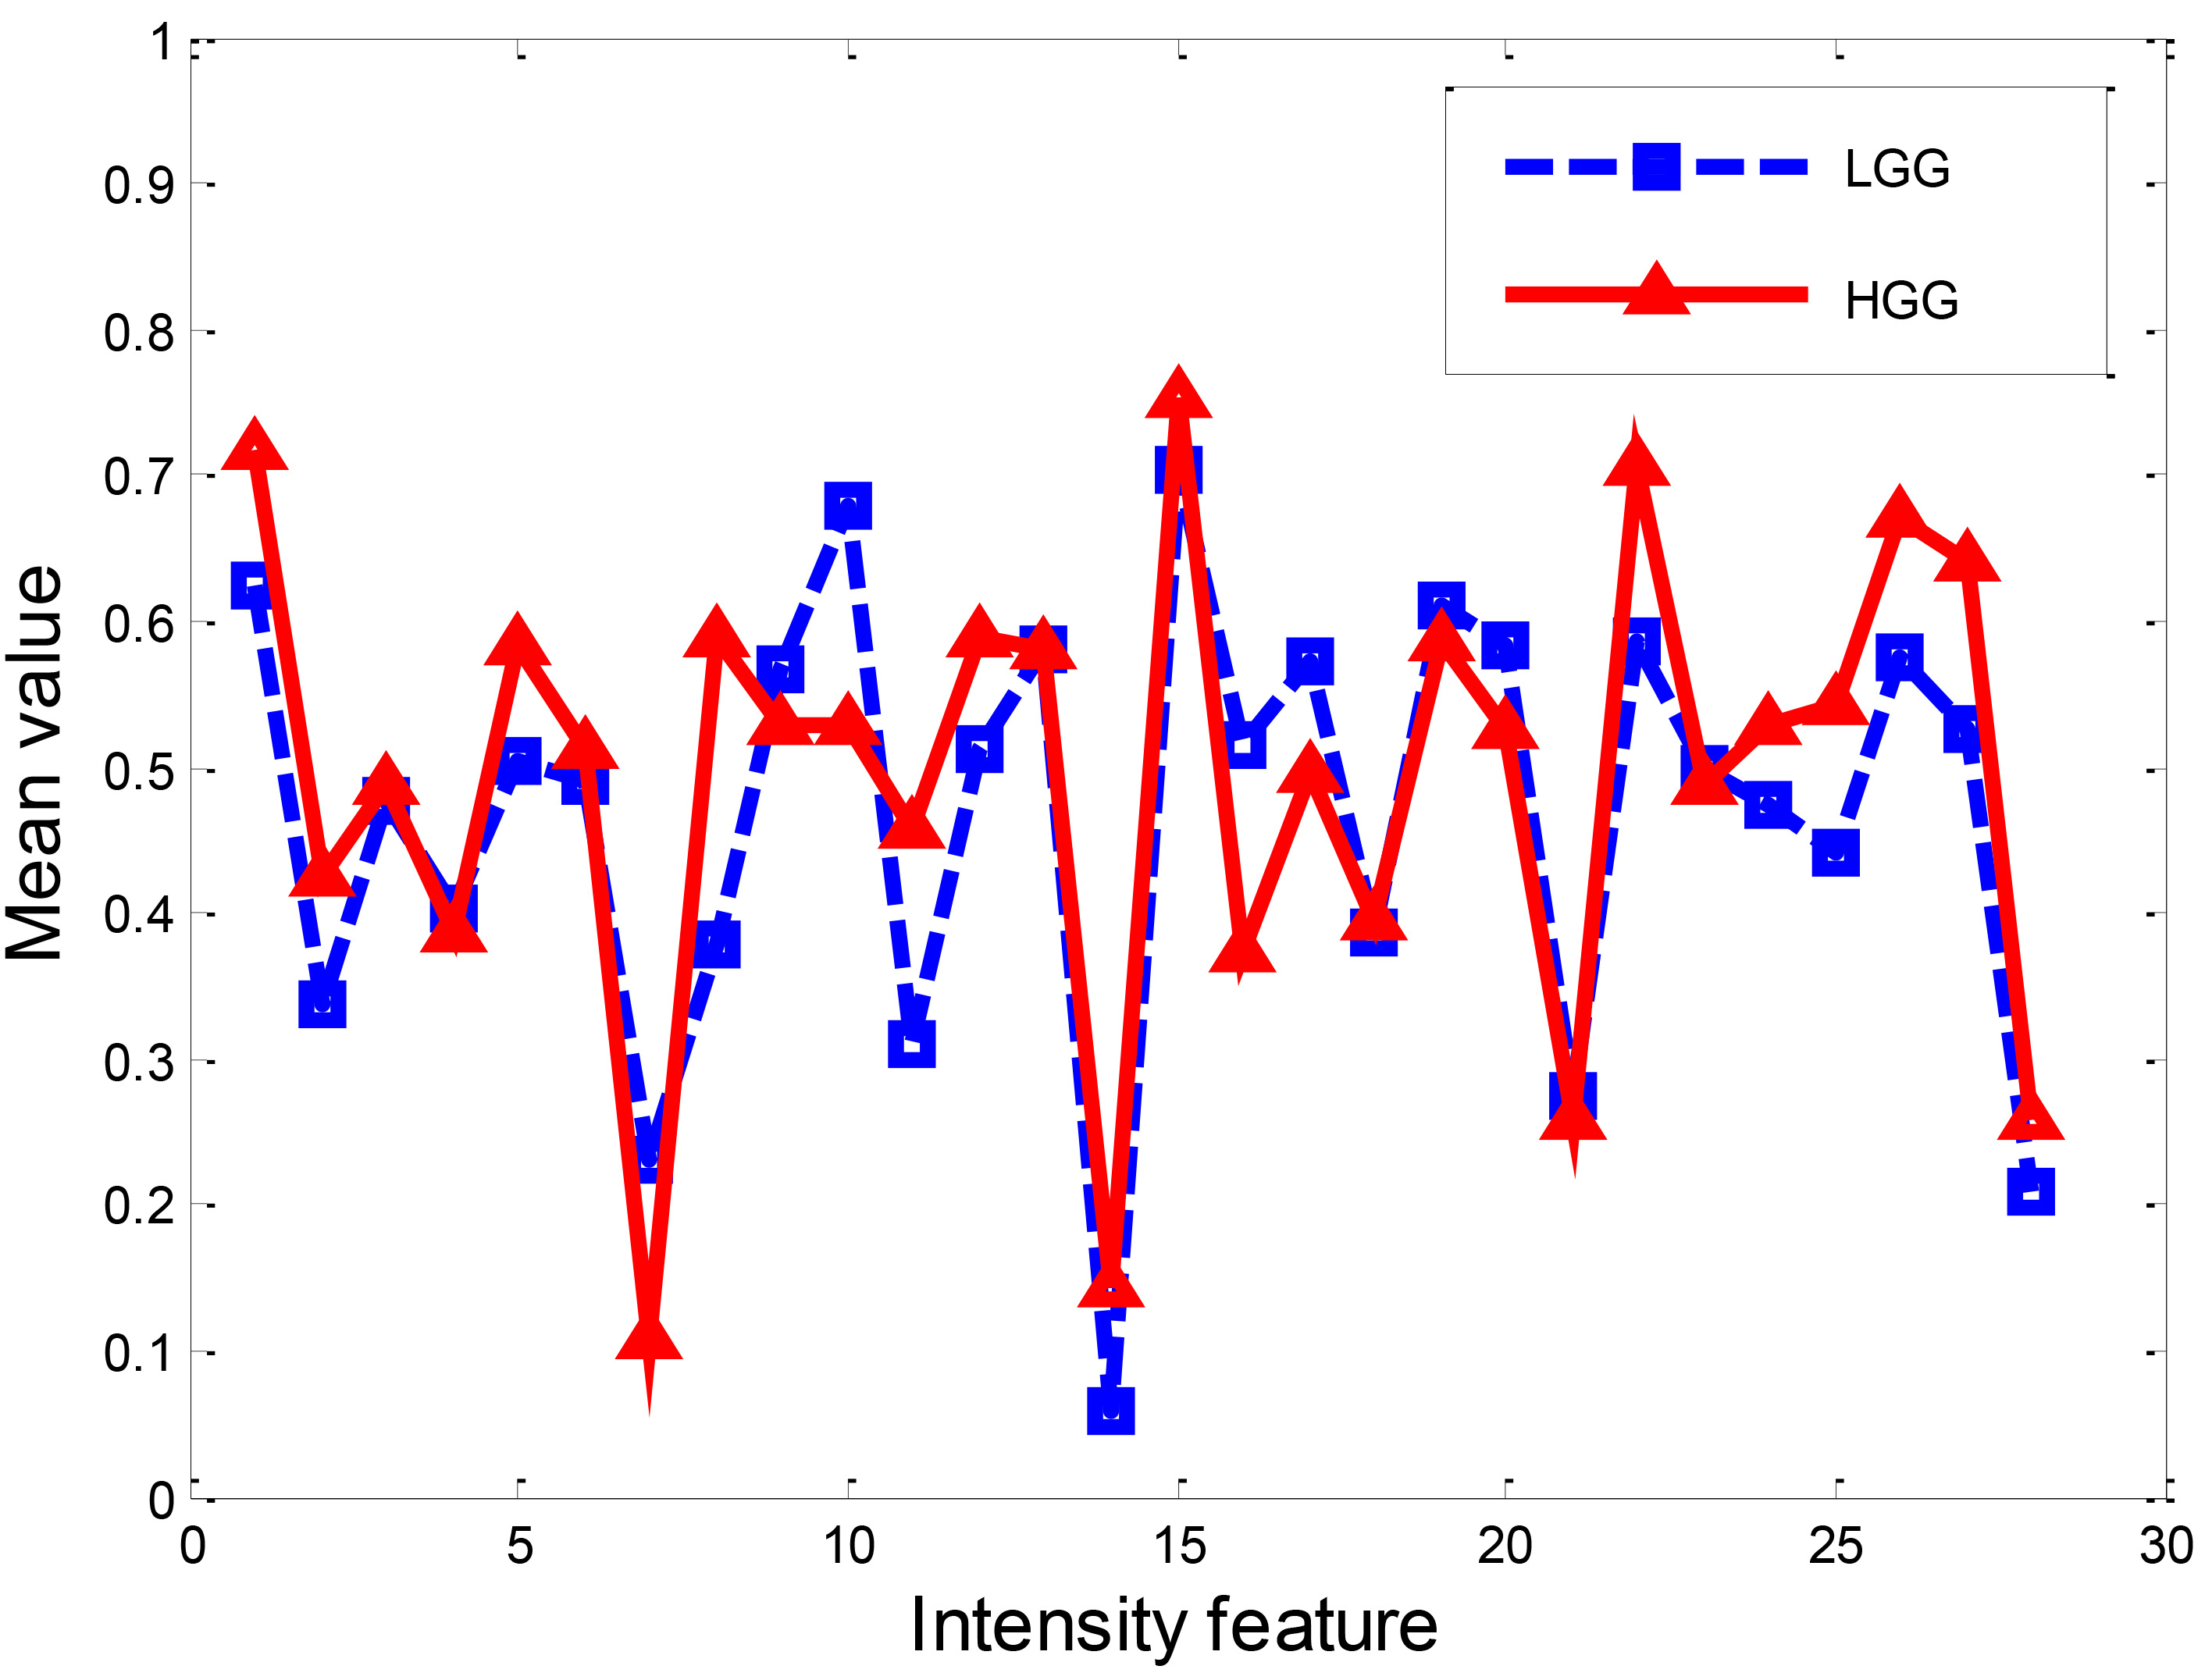 Intensity feature of LGG and HGG.